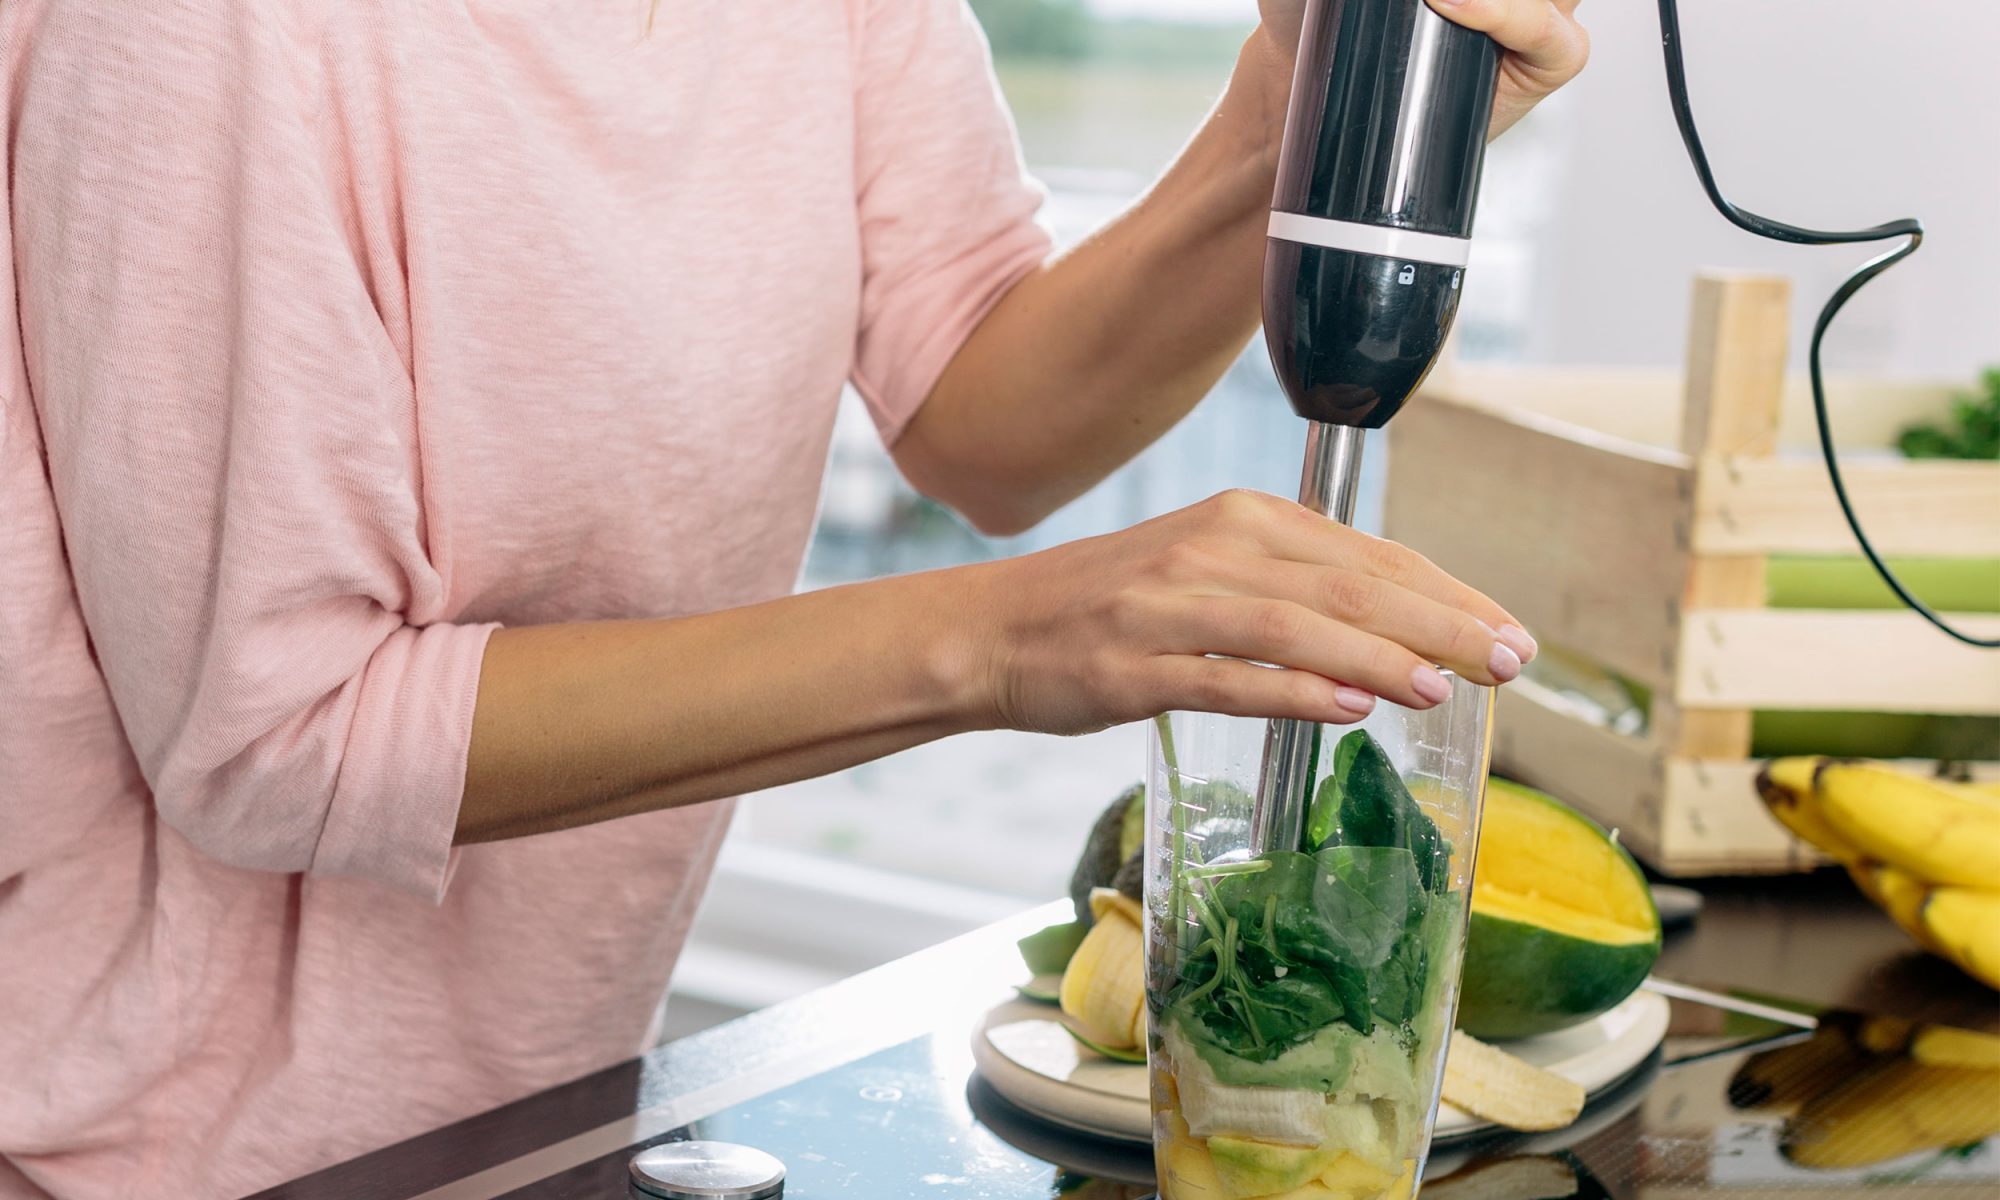 How to use immersion blender for protein shakes